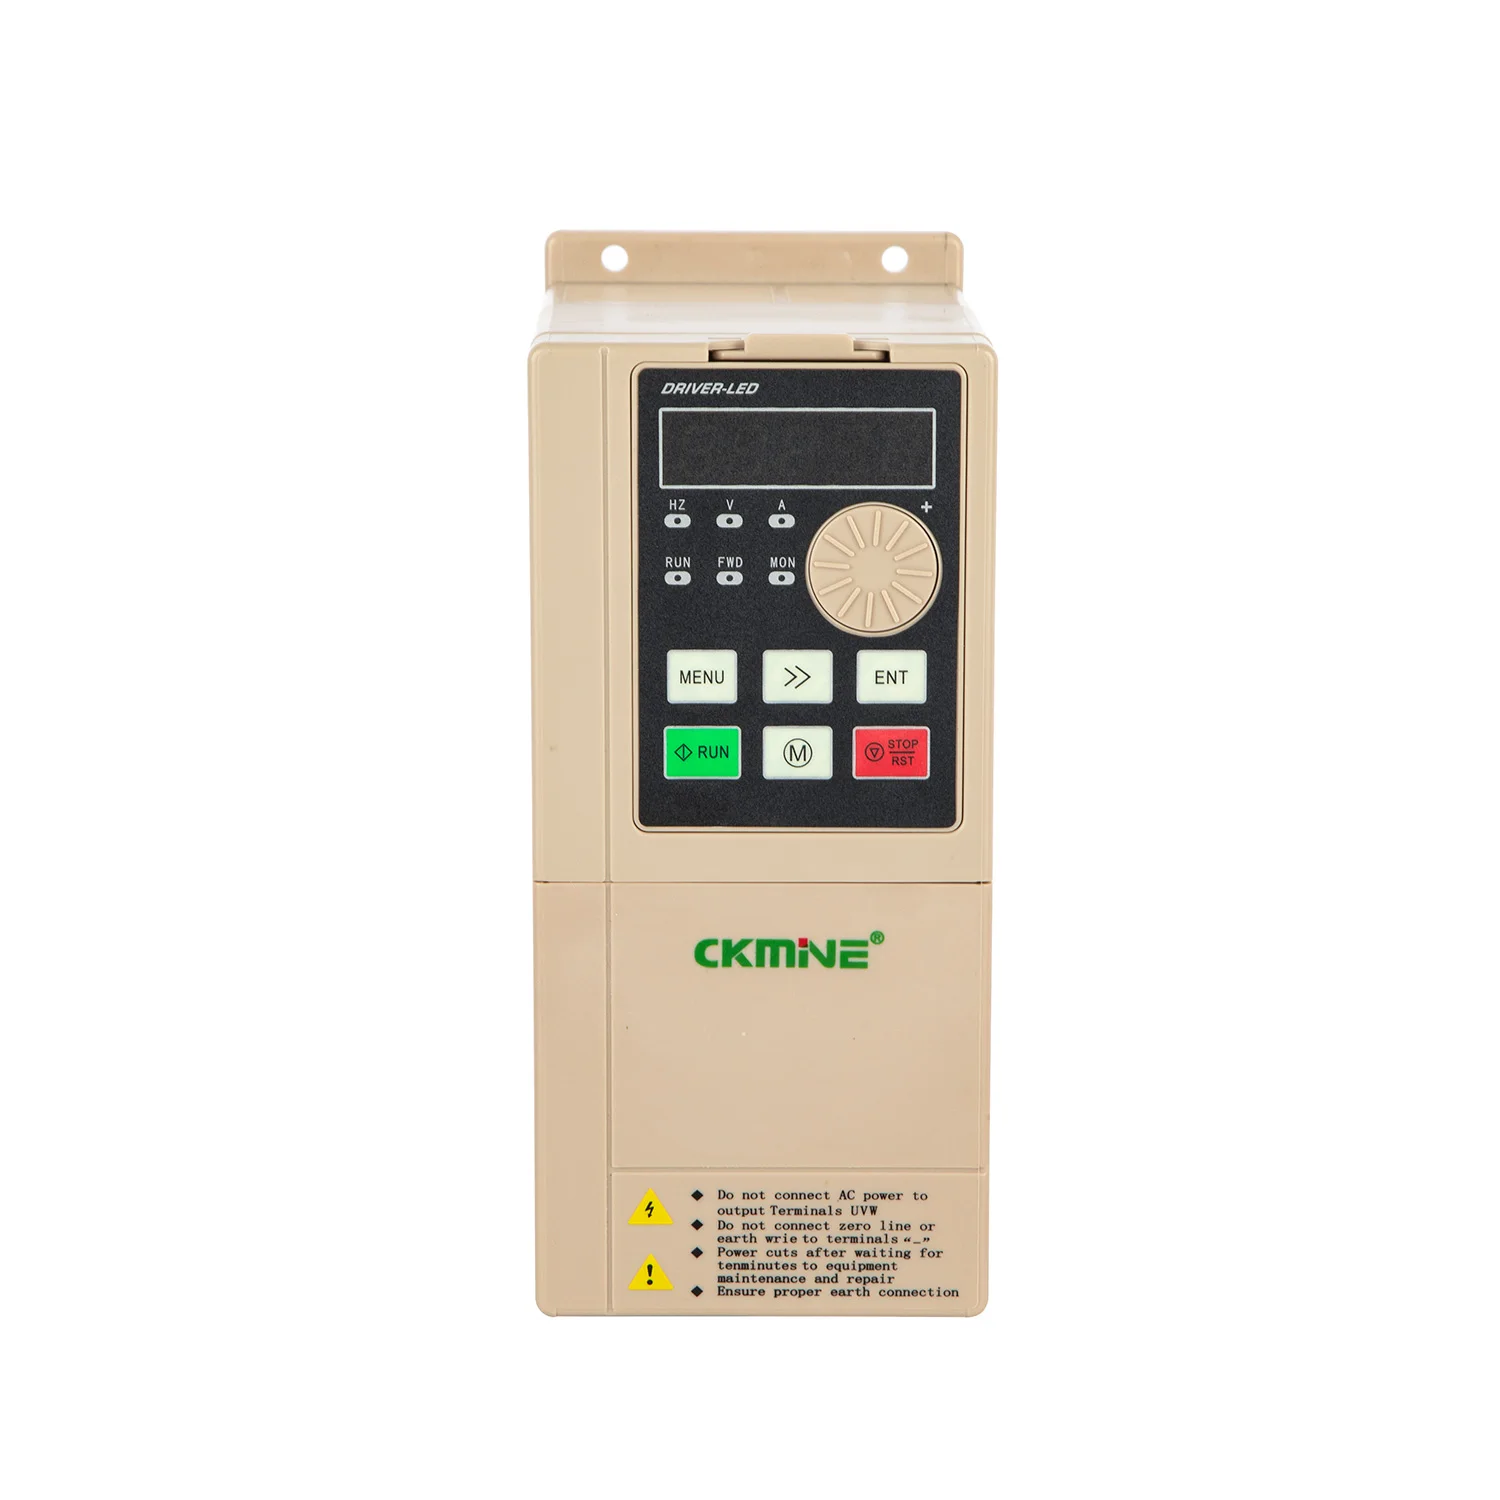 CKMINE KM580 Factory Price 2.2kW 3HP Motor Inverter Variable Frequency Driver 380V 3phase to three phase Speed Control VFD